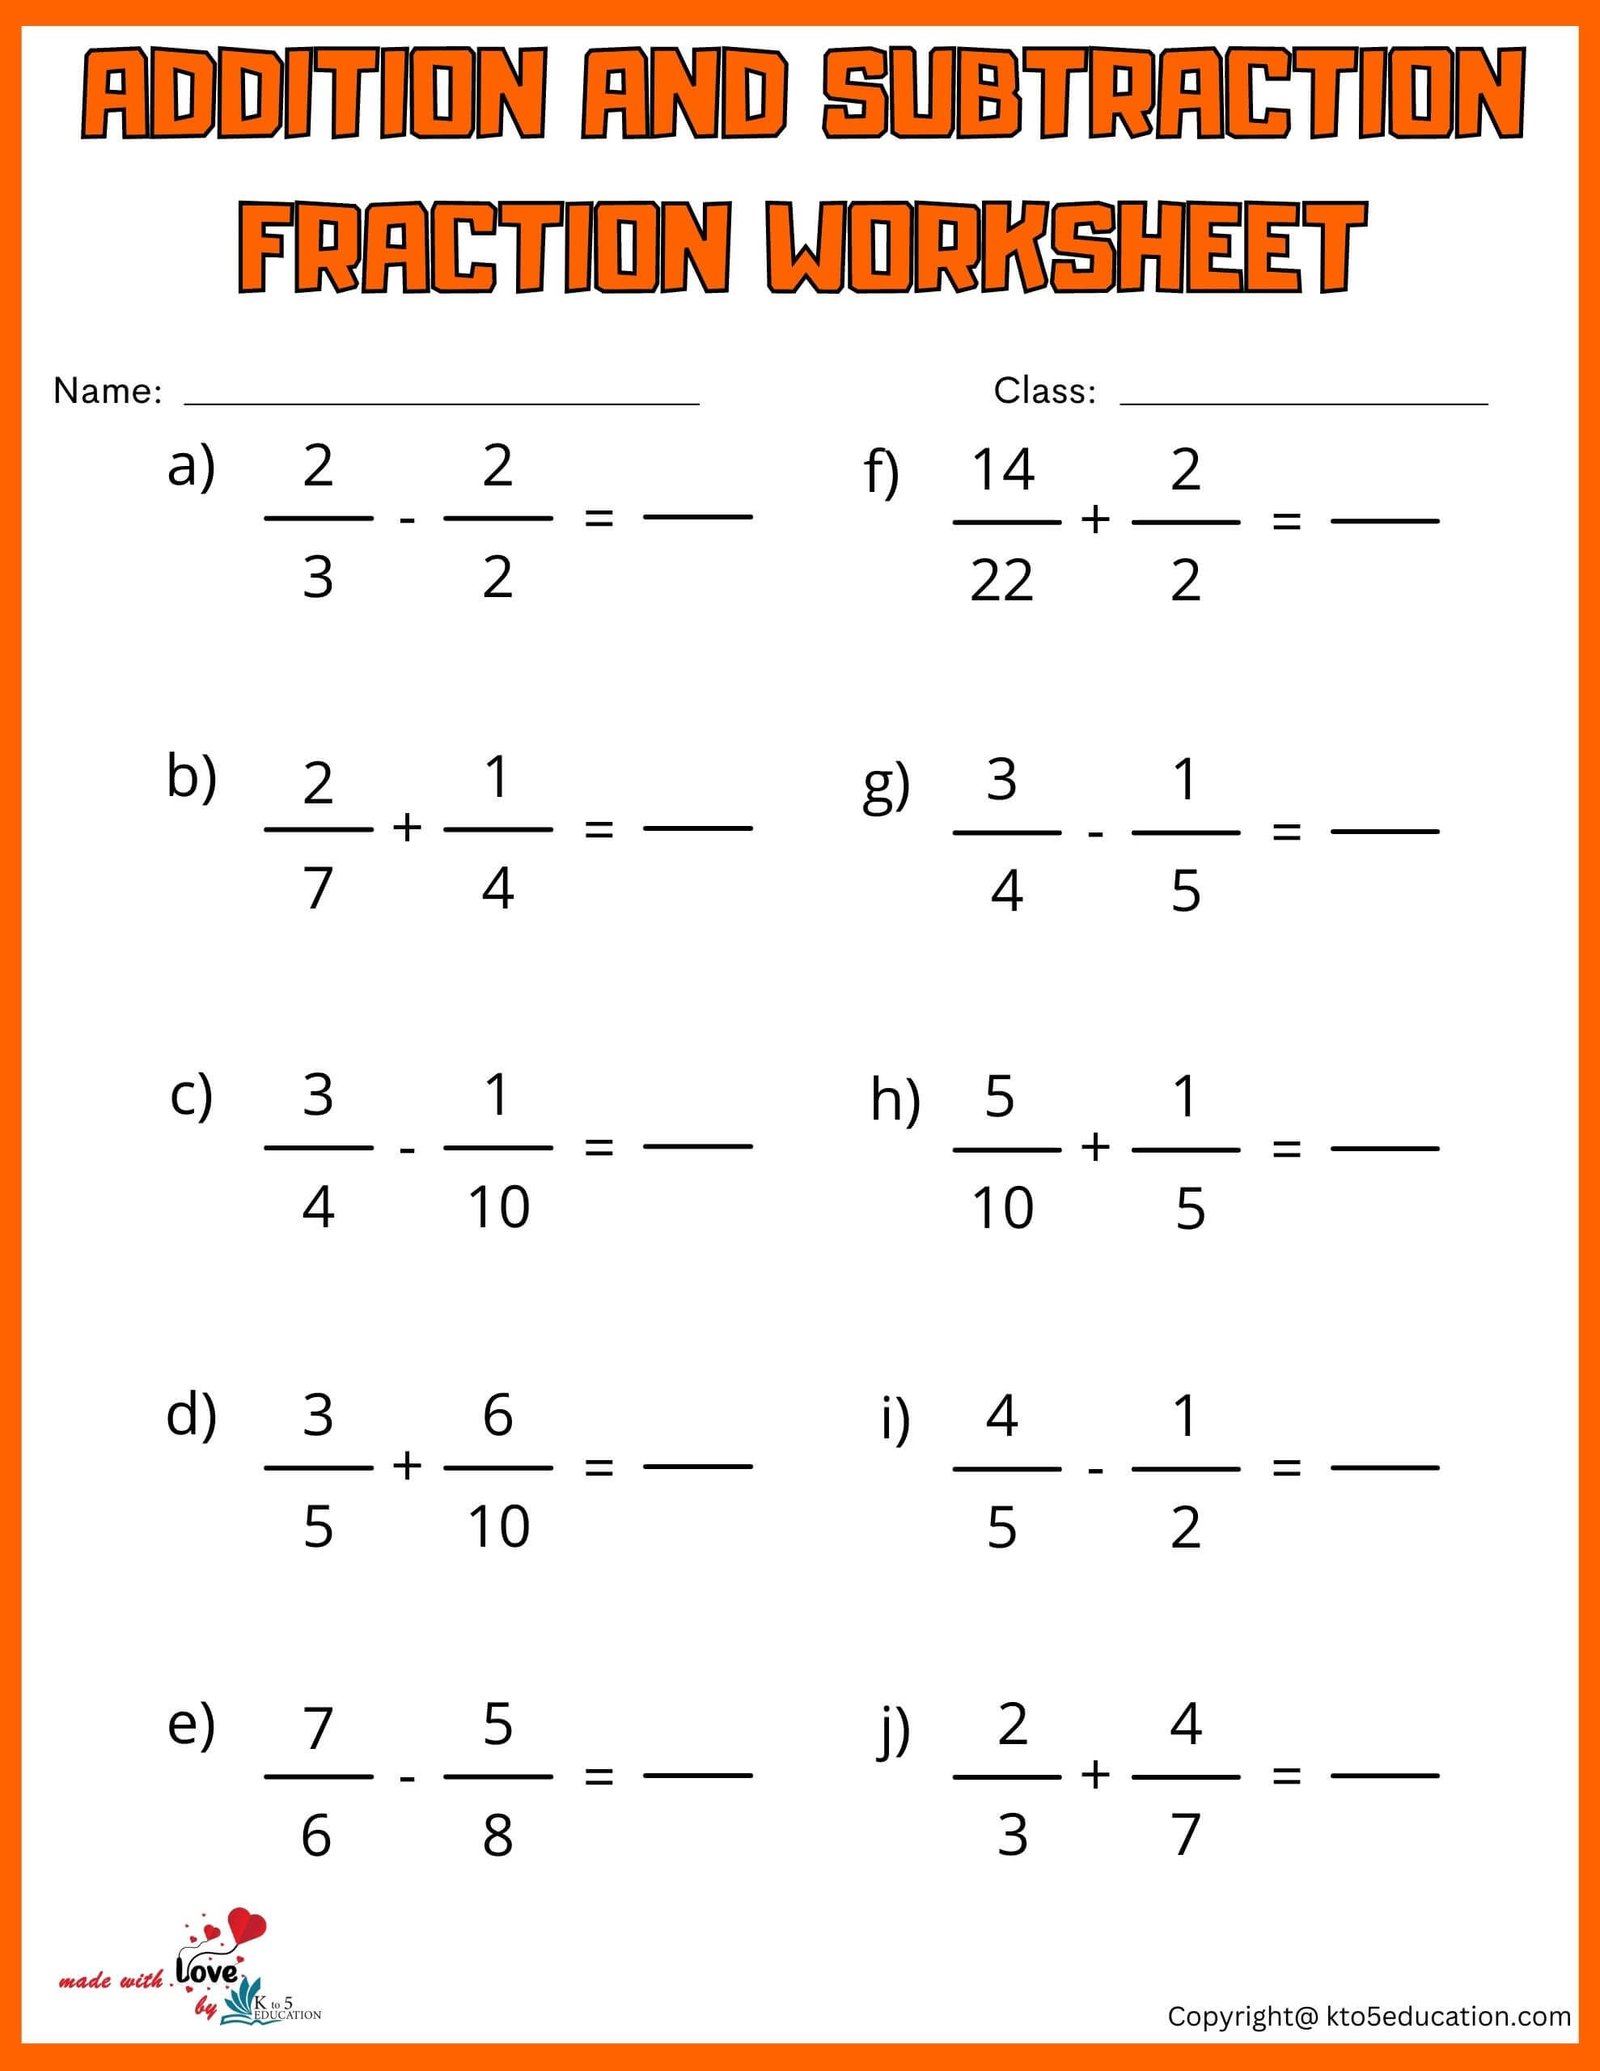 Adding And Subtracting Fraction Worksheet For Fifth Grade